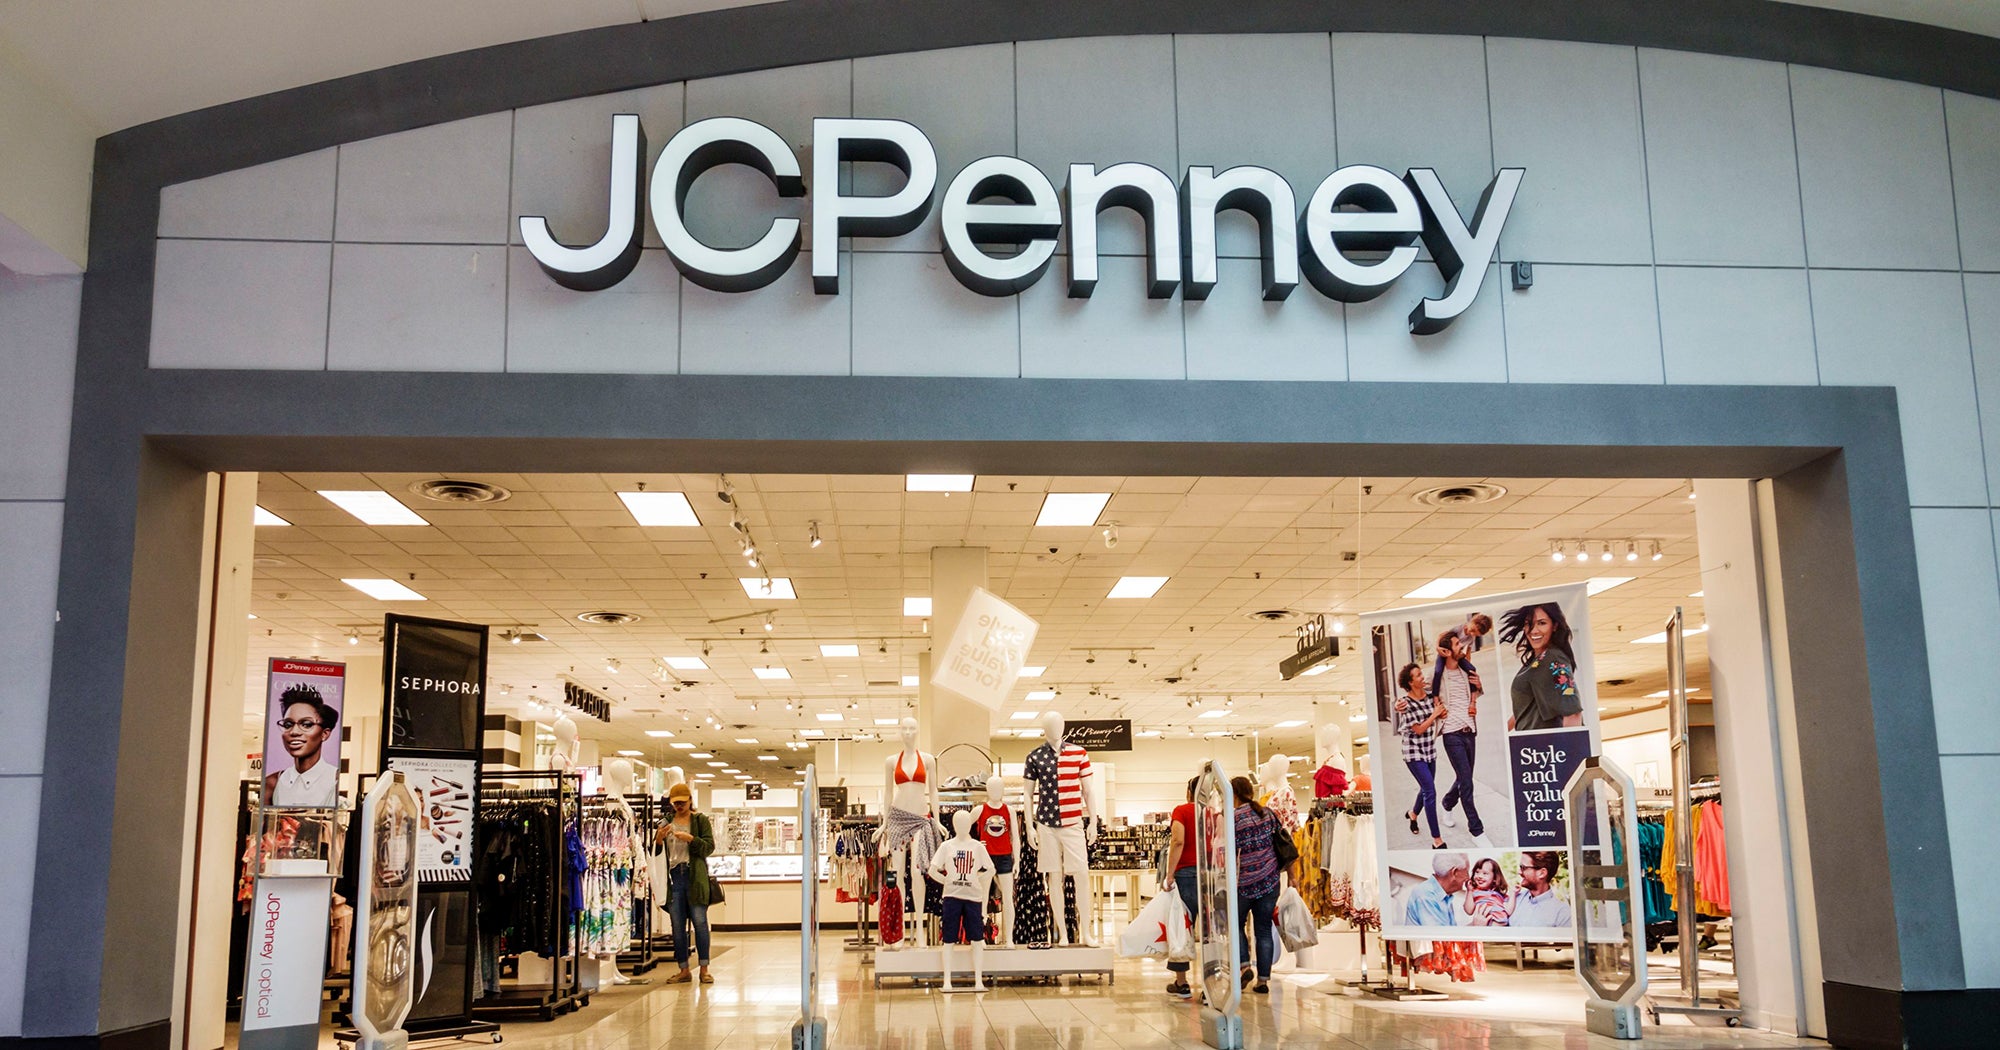 JCPenney dedicates homepage to beauty – for 48 hours